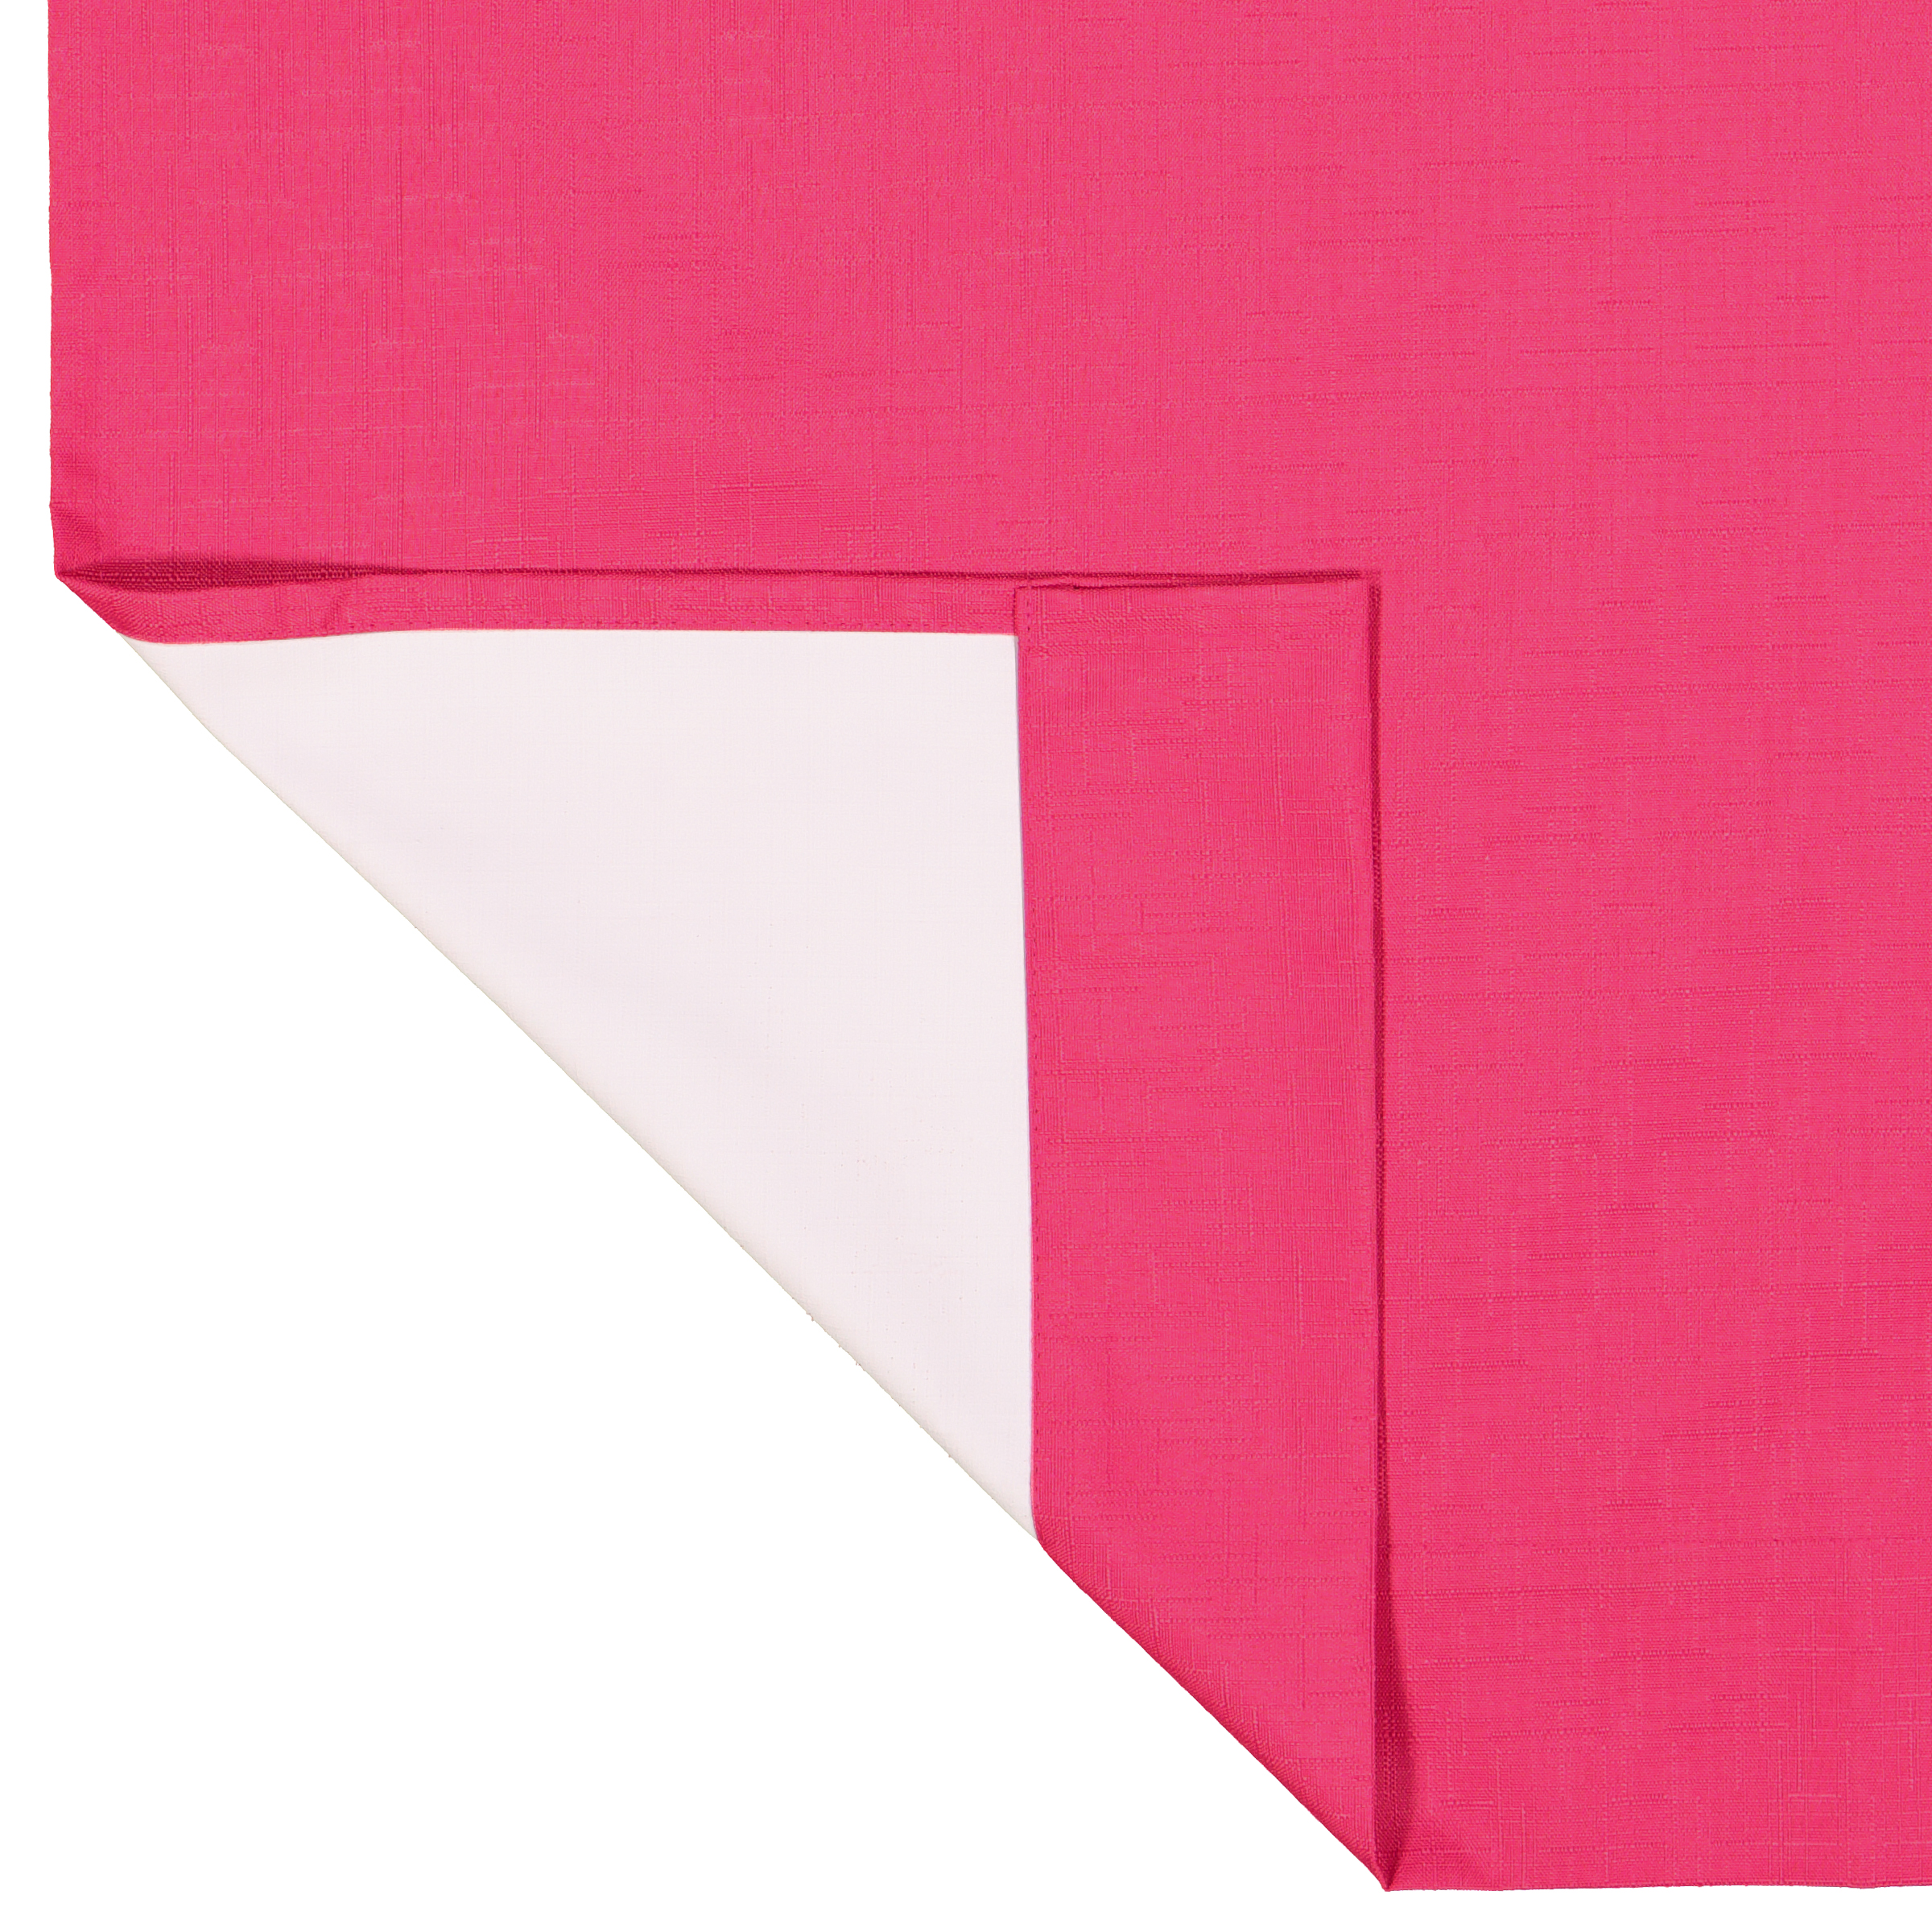 Eclipse Dayton Solid Color Blackout Grommet Single Curtain Panel, Pink, 42 x 63 - image 3 of 9